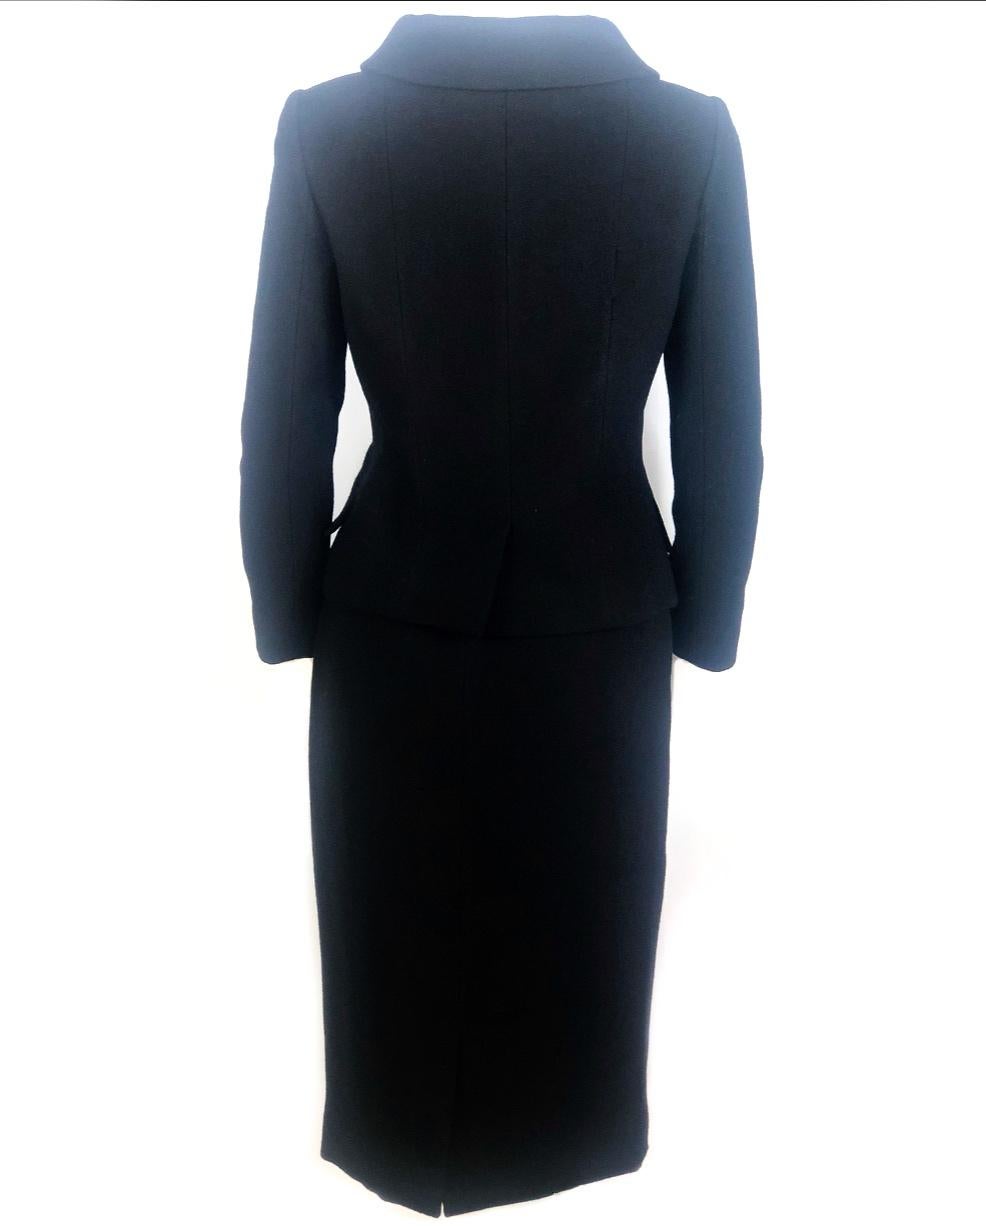 CHRISTIAN DIOR Black Wool Blazer Jacket And Pencil Skirt Suit Size 8 w/ Tags  In New Condition For Sale In Beverly Hills, CA